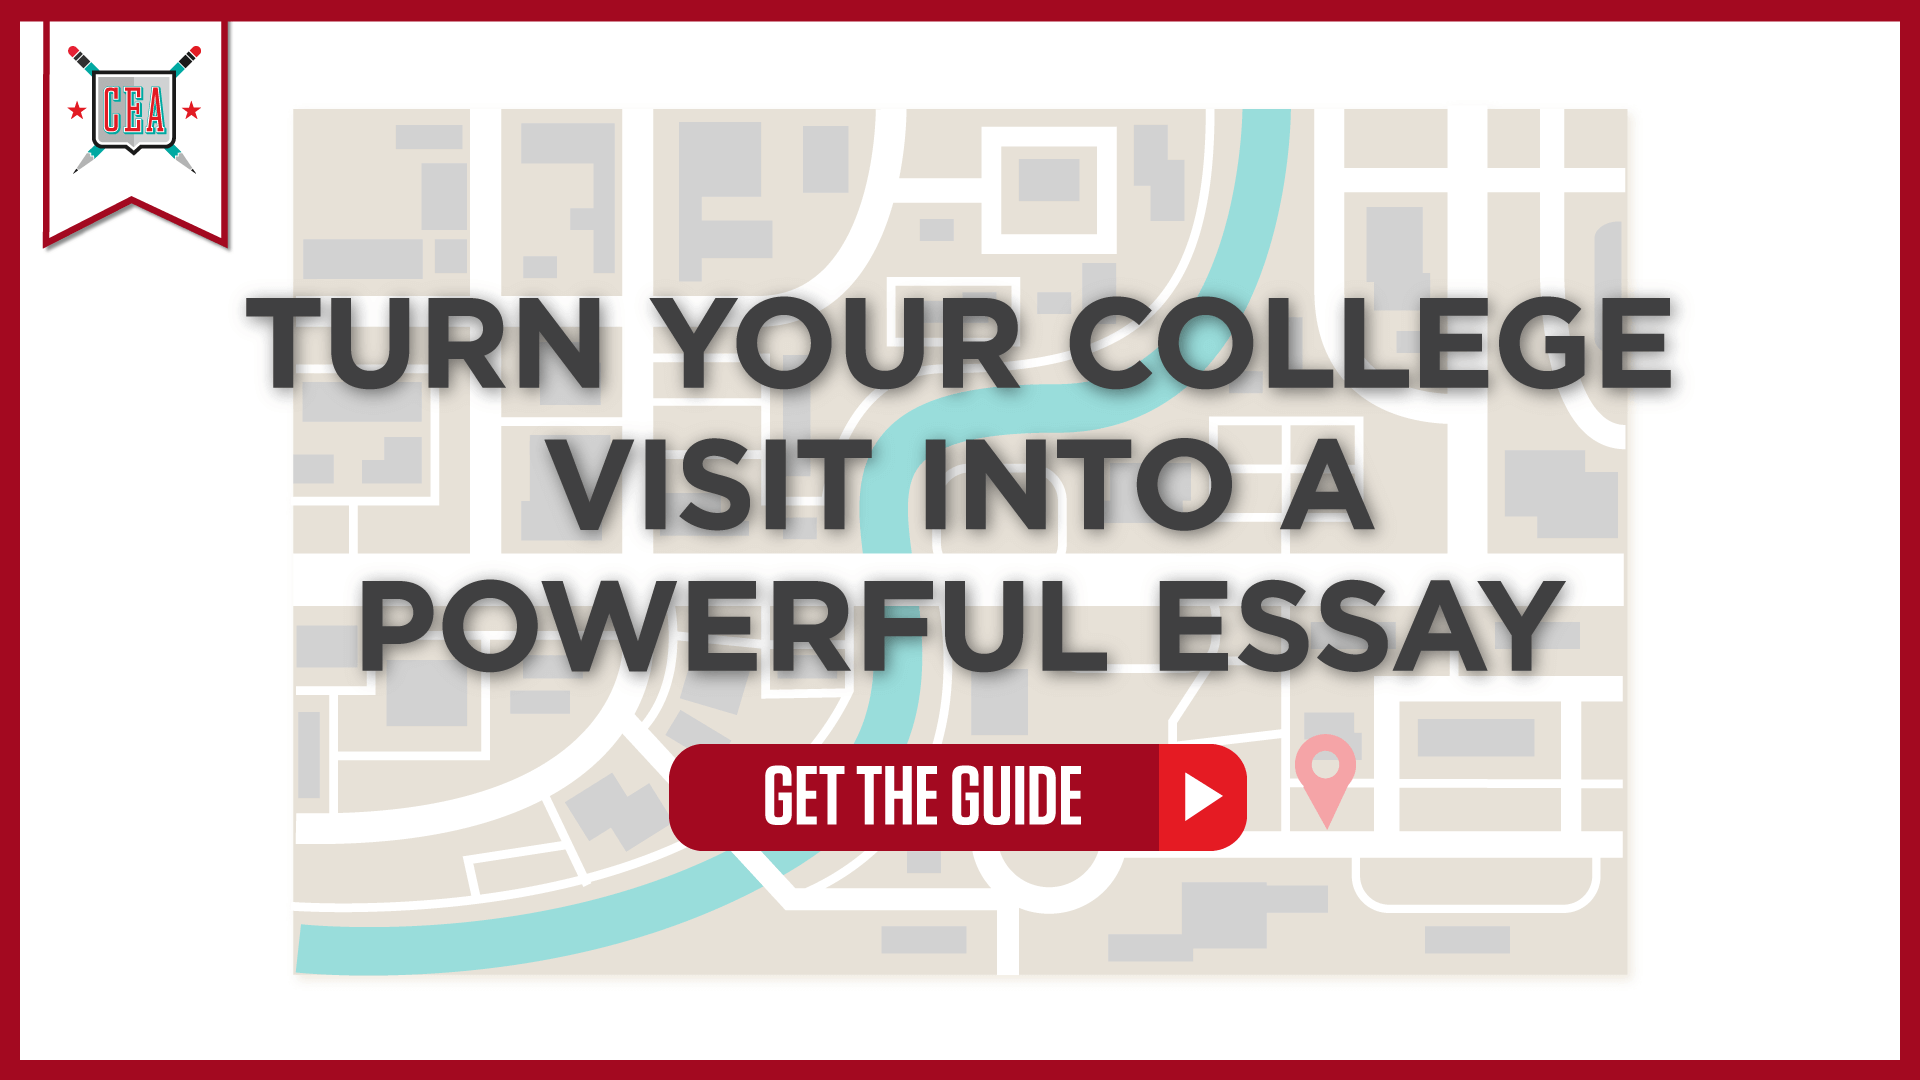 Insider Tips for Turning Your College Visit into A Powerful Essay